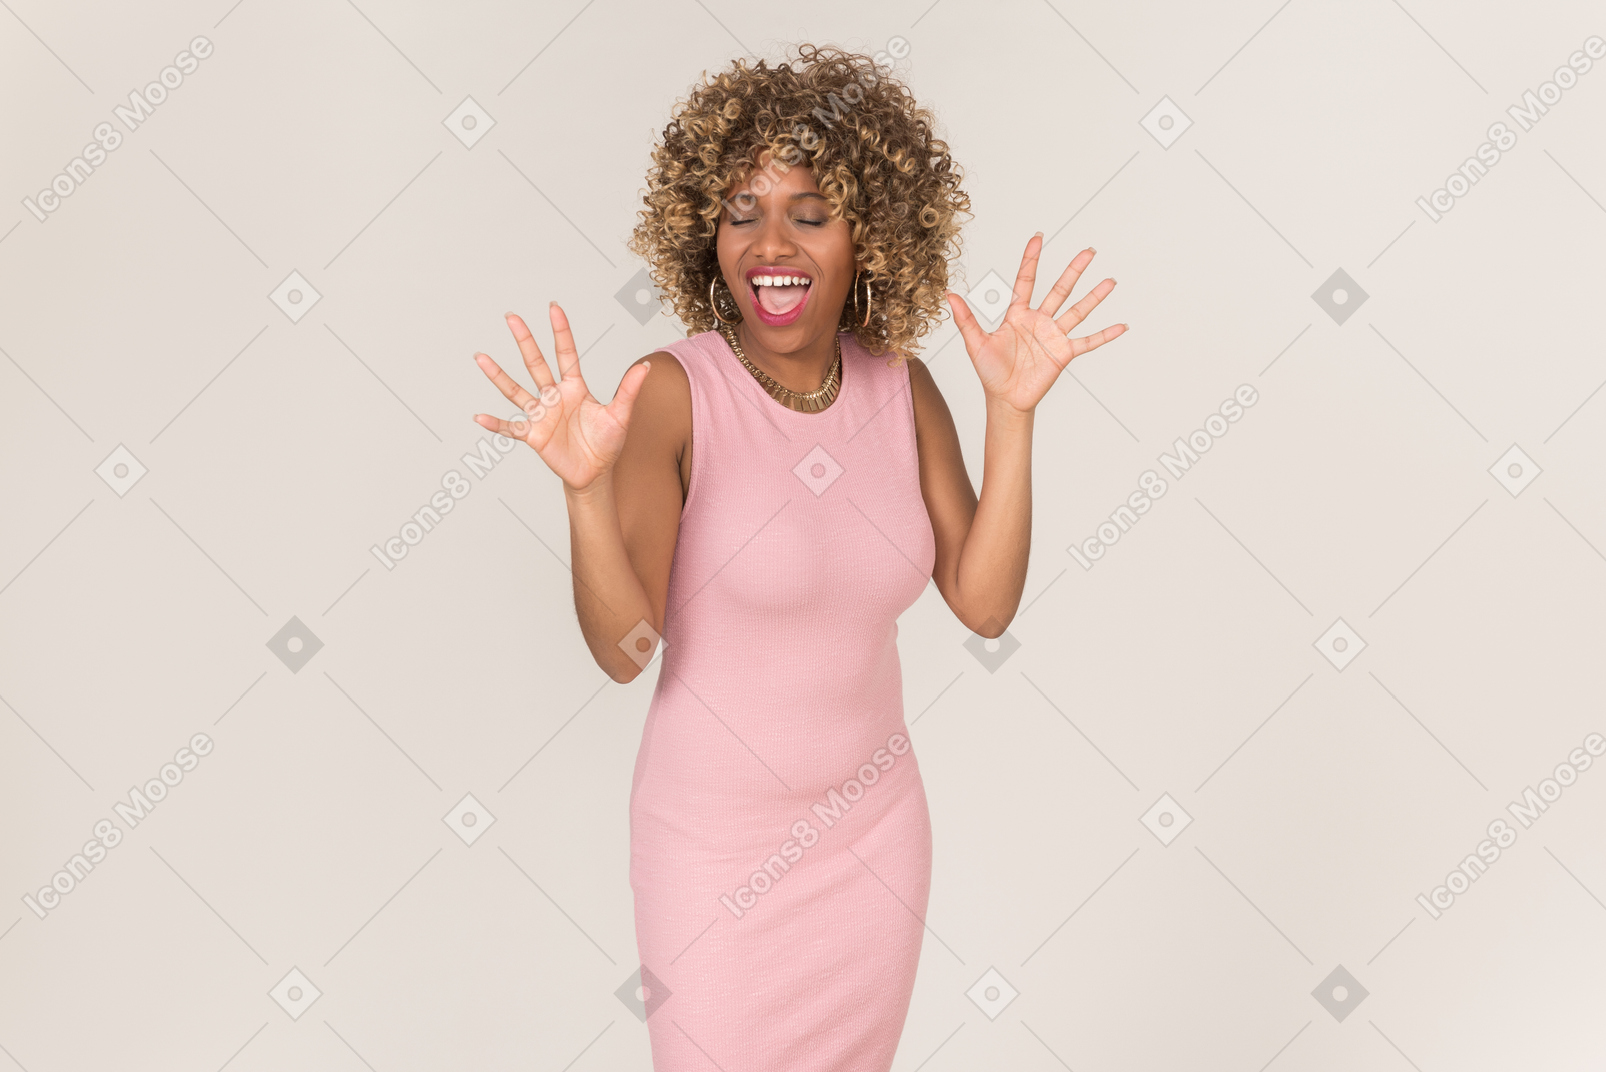 A young black fluffy-haired woman in a pastel pink cocktail dress, having fun alone against a plain grey background